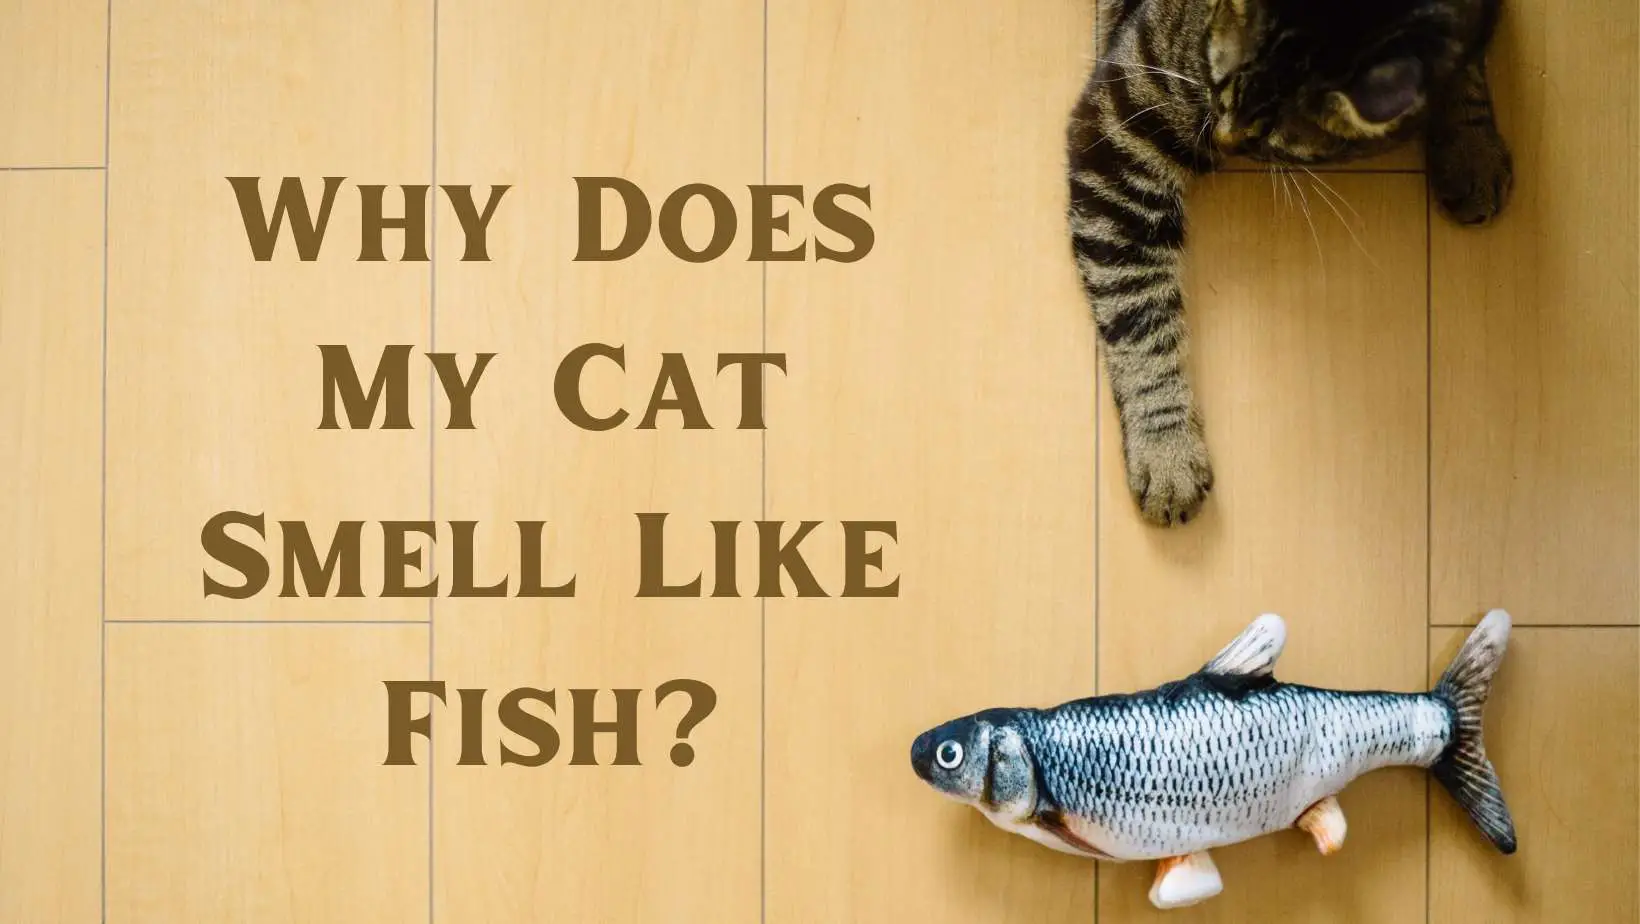 Why Does My Cat Smell Like Fish?